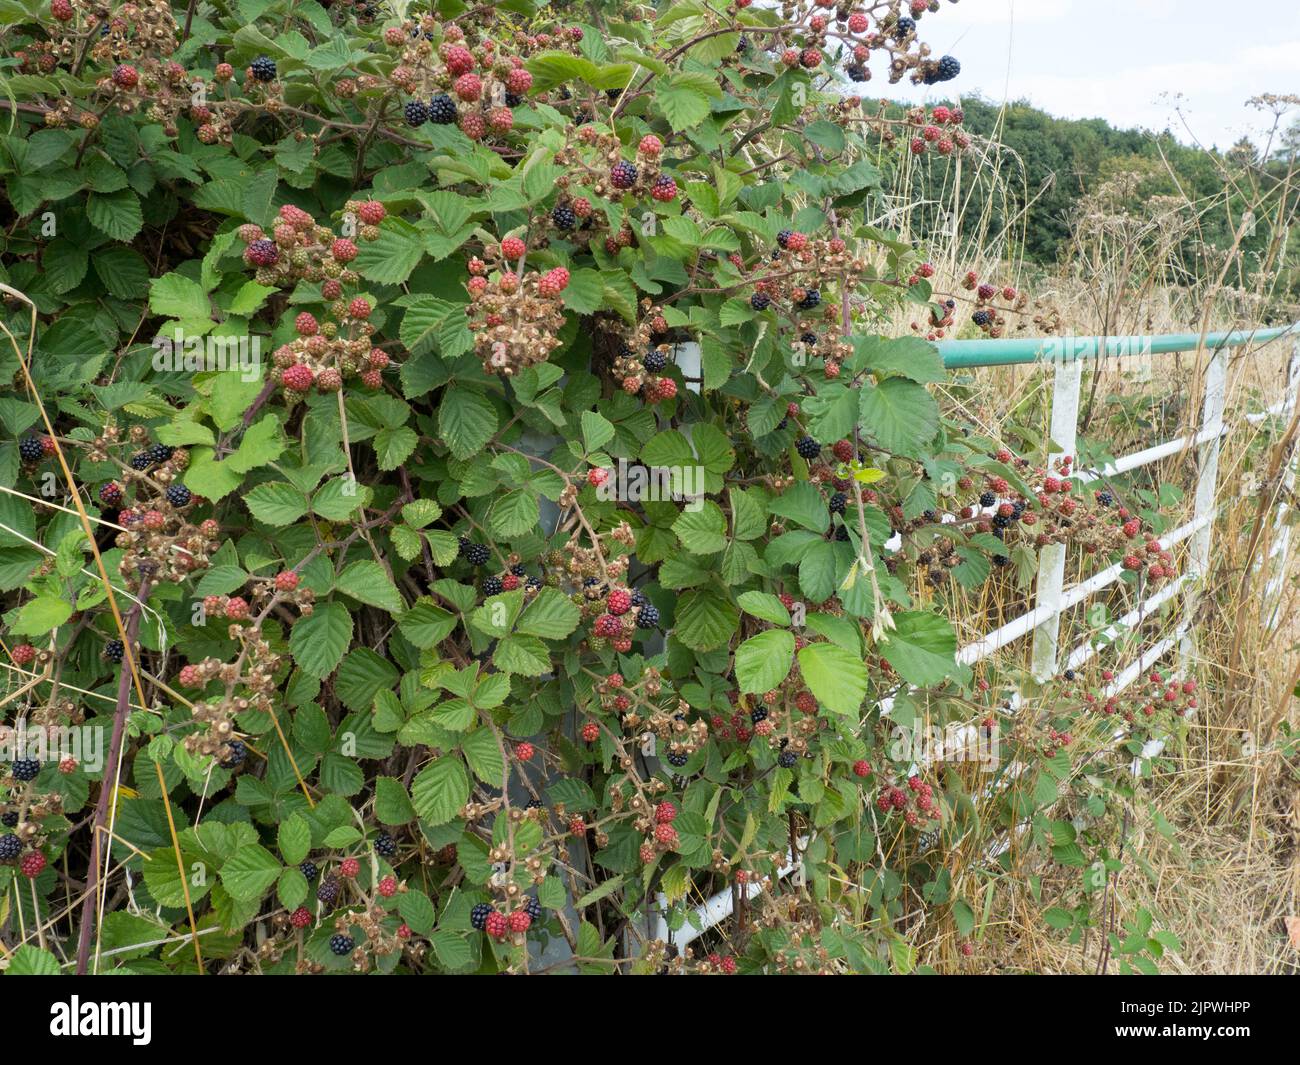 Blackberries growing over a Lincolnshire farm gate. Stock Photo